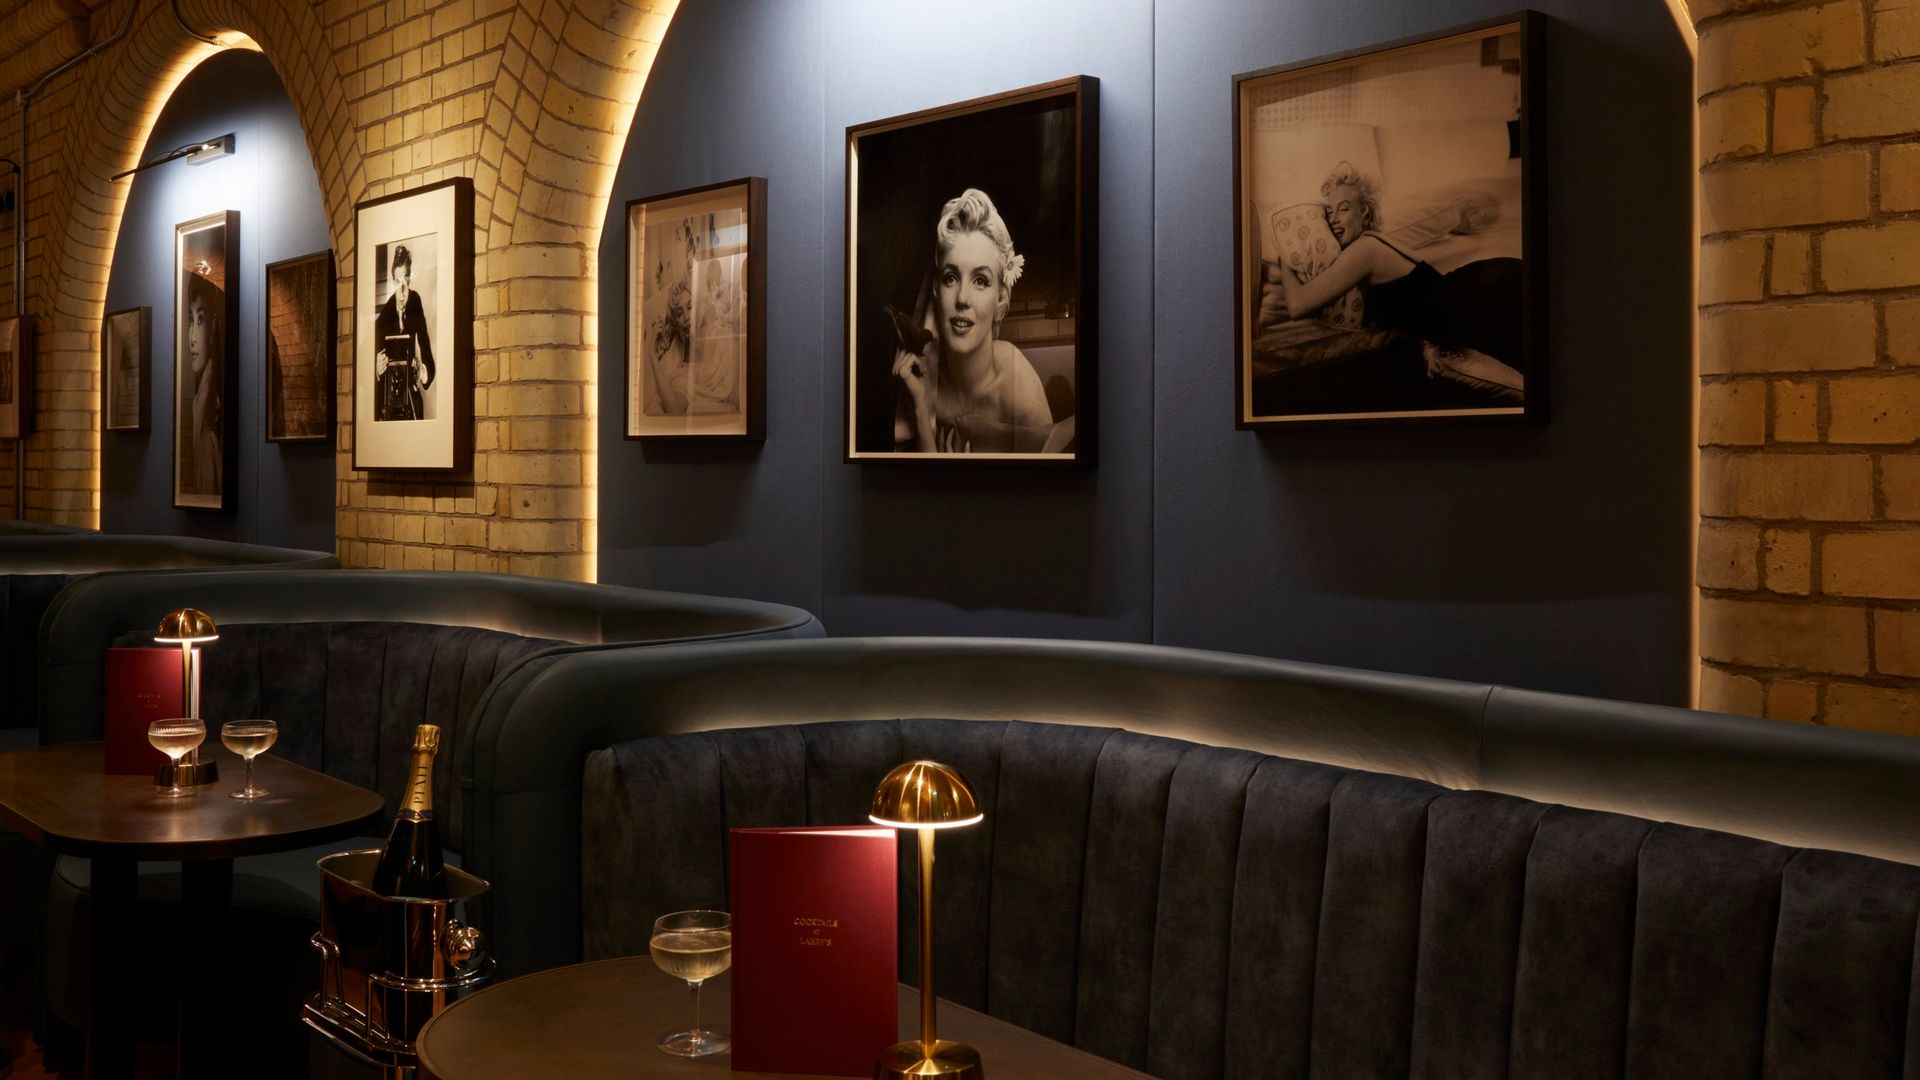 Larry's Bar interior. Velvet blue couches, dimmed gold table lamps and photos of Marilyn Monroe on the wall